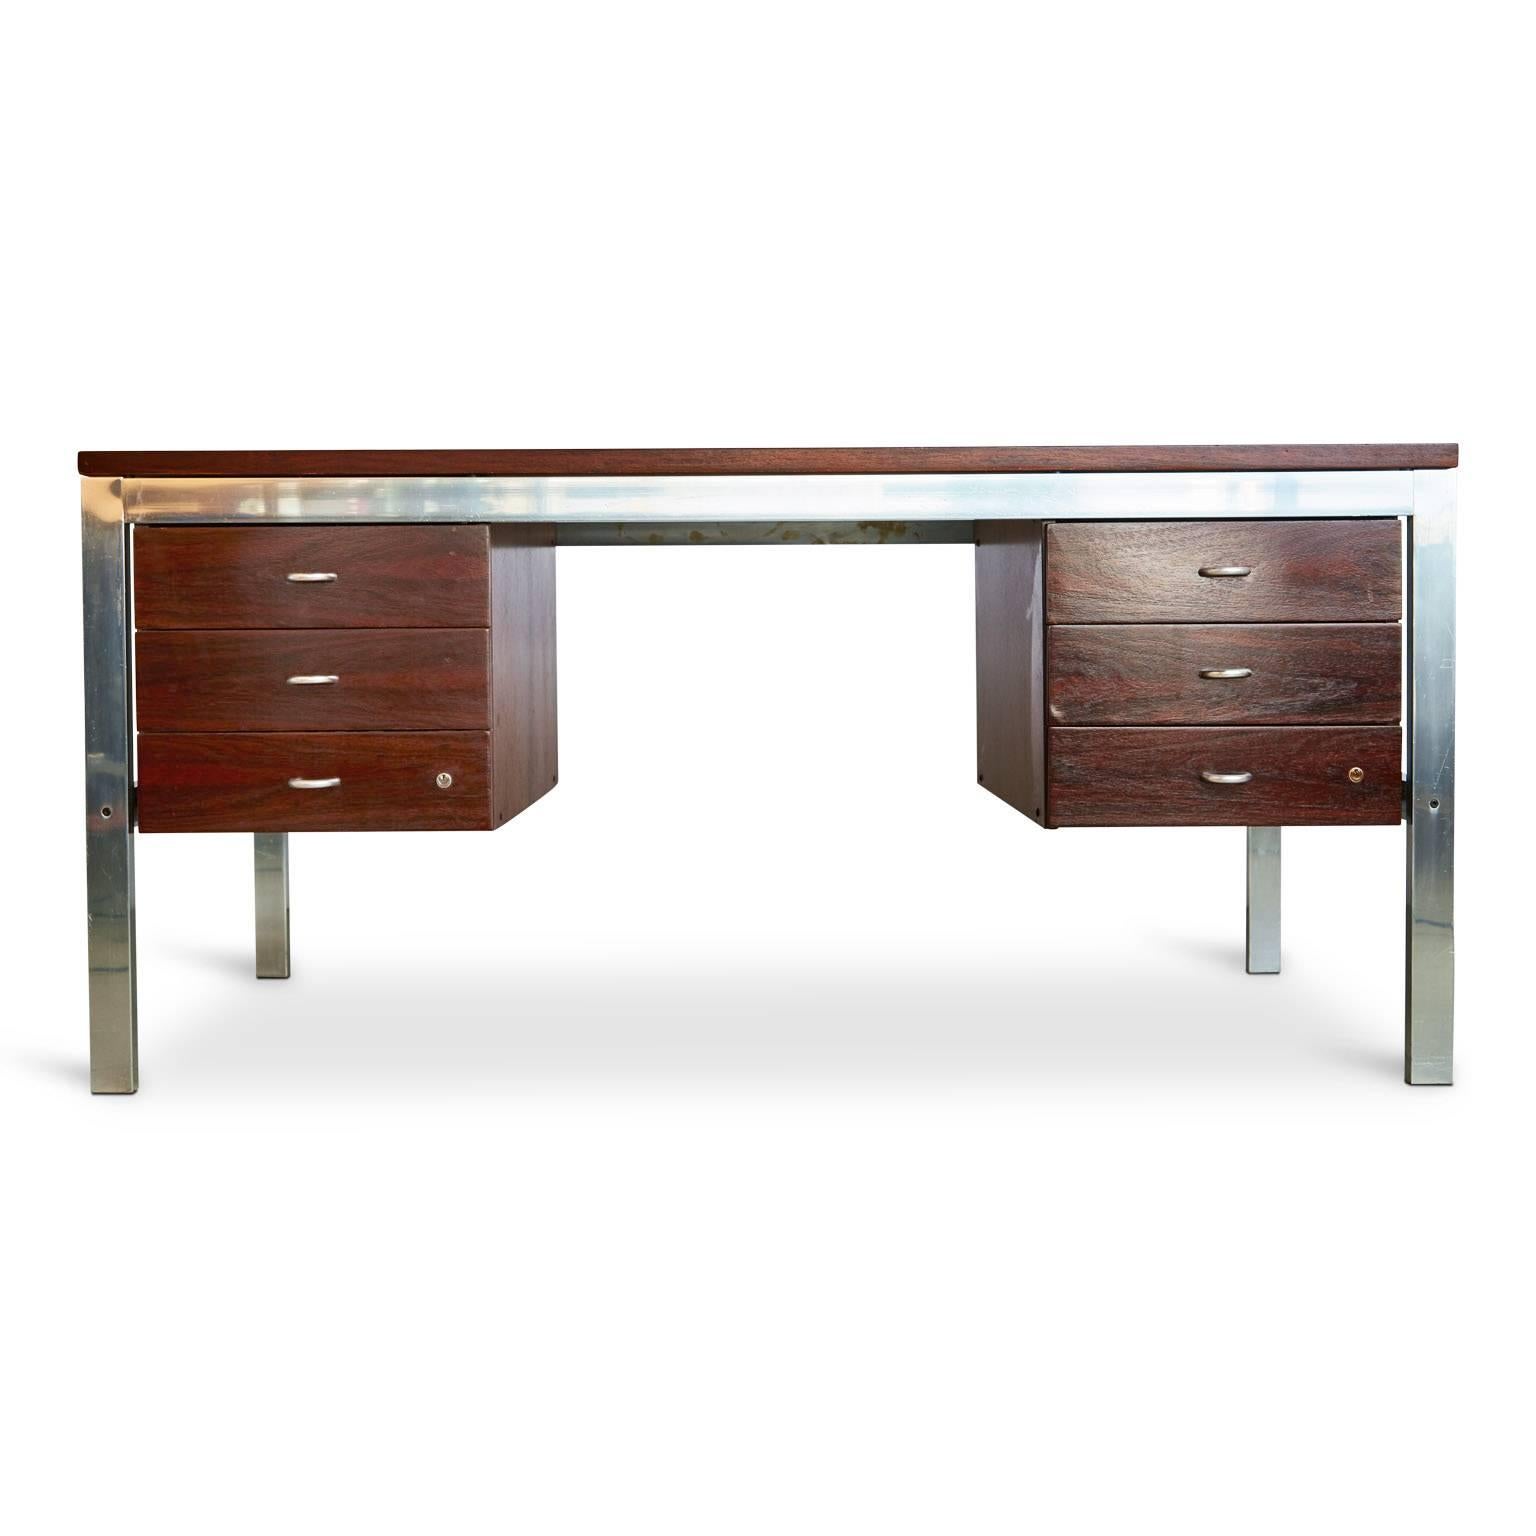 Recently refinished Brazilian rosewood desk with aluminum frame by Tora Brazil. Featuring double pedestals consisting of two (2) sets of three (3) drawers with half-circle chrome pulls and the original label on one end with the word 